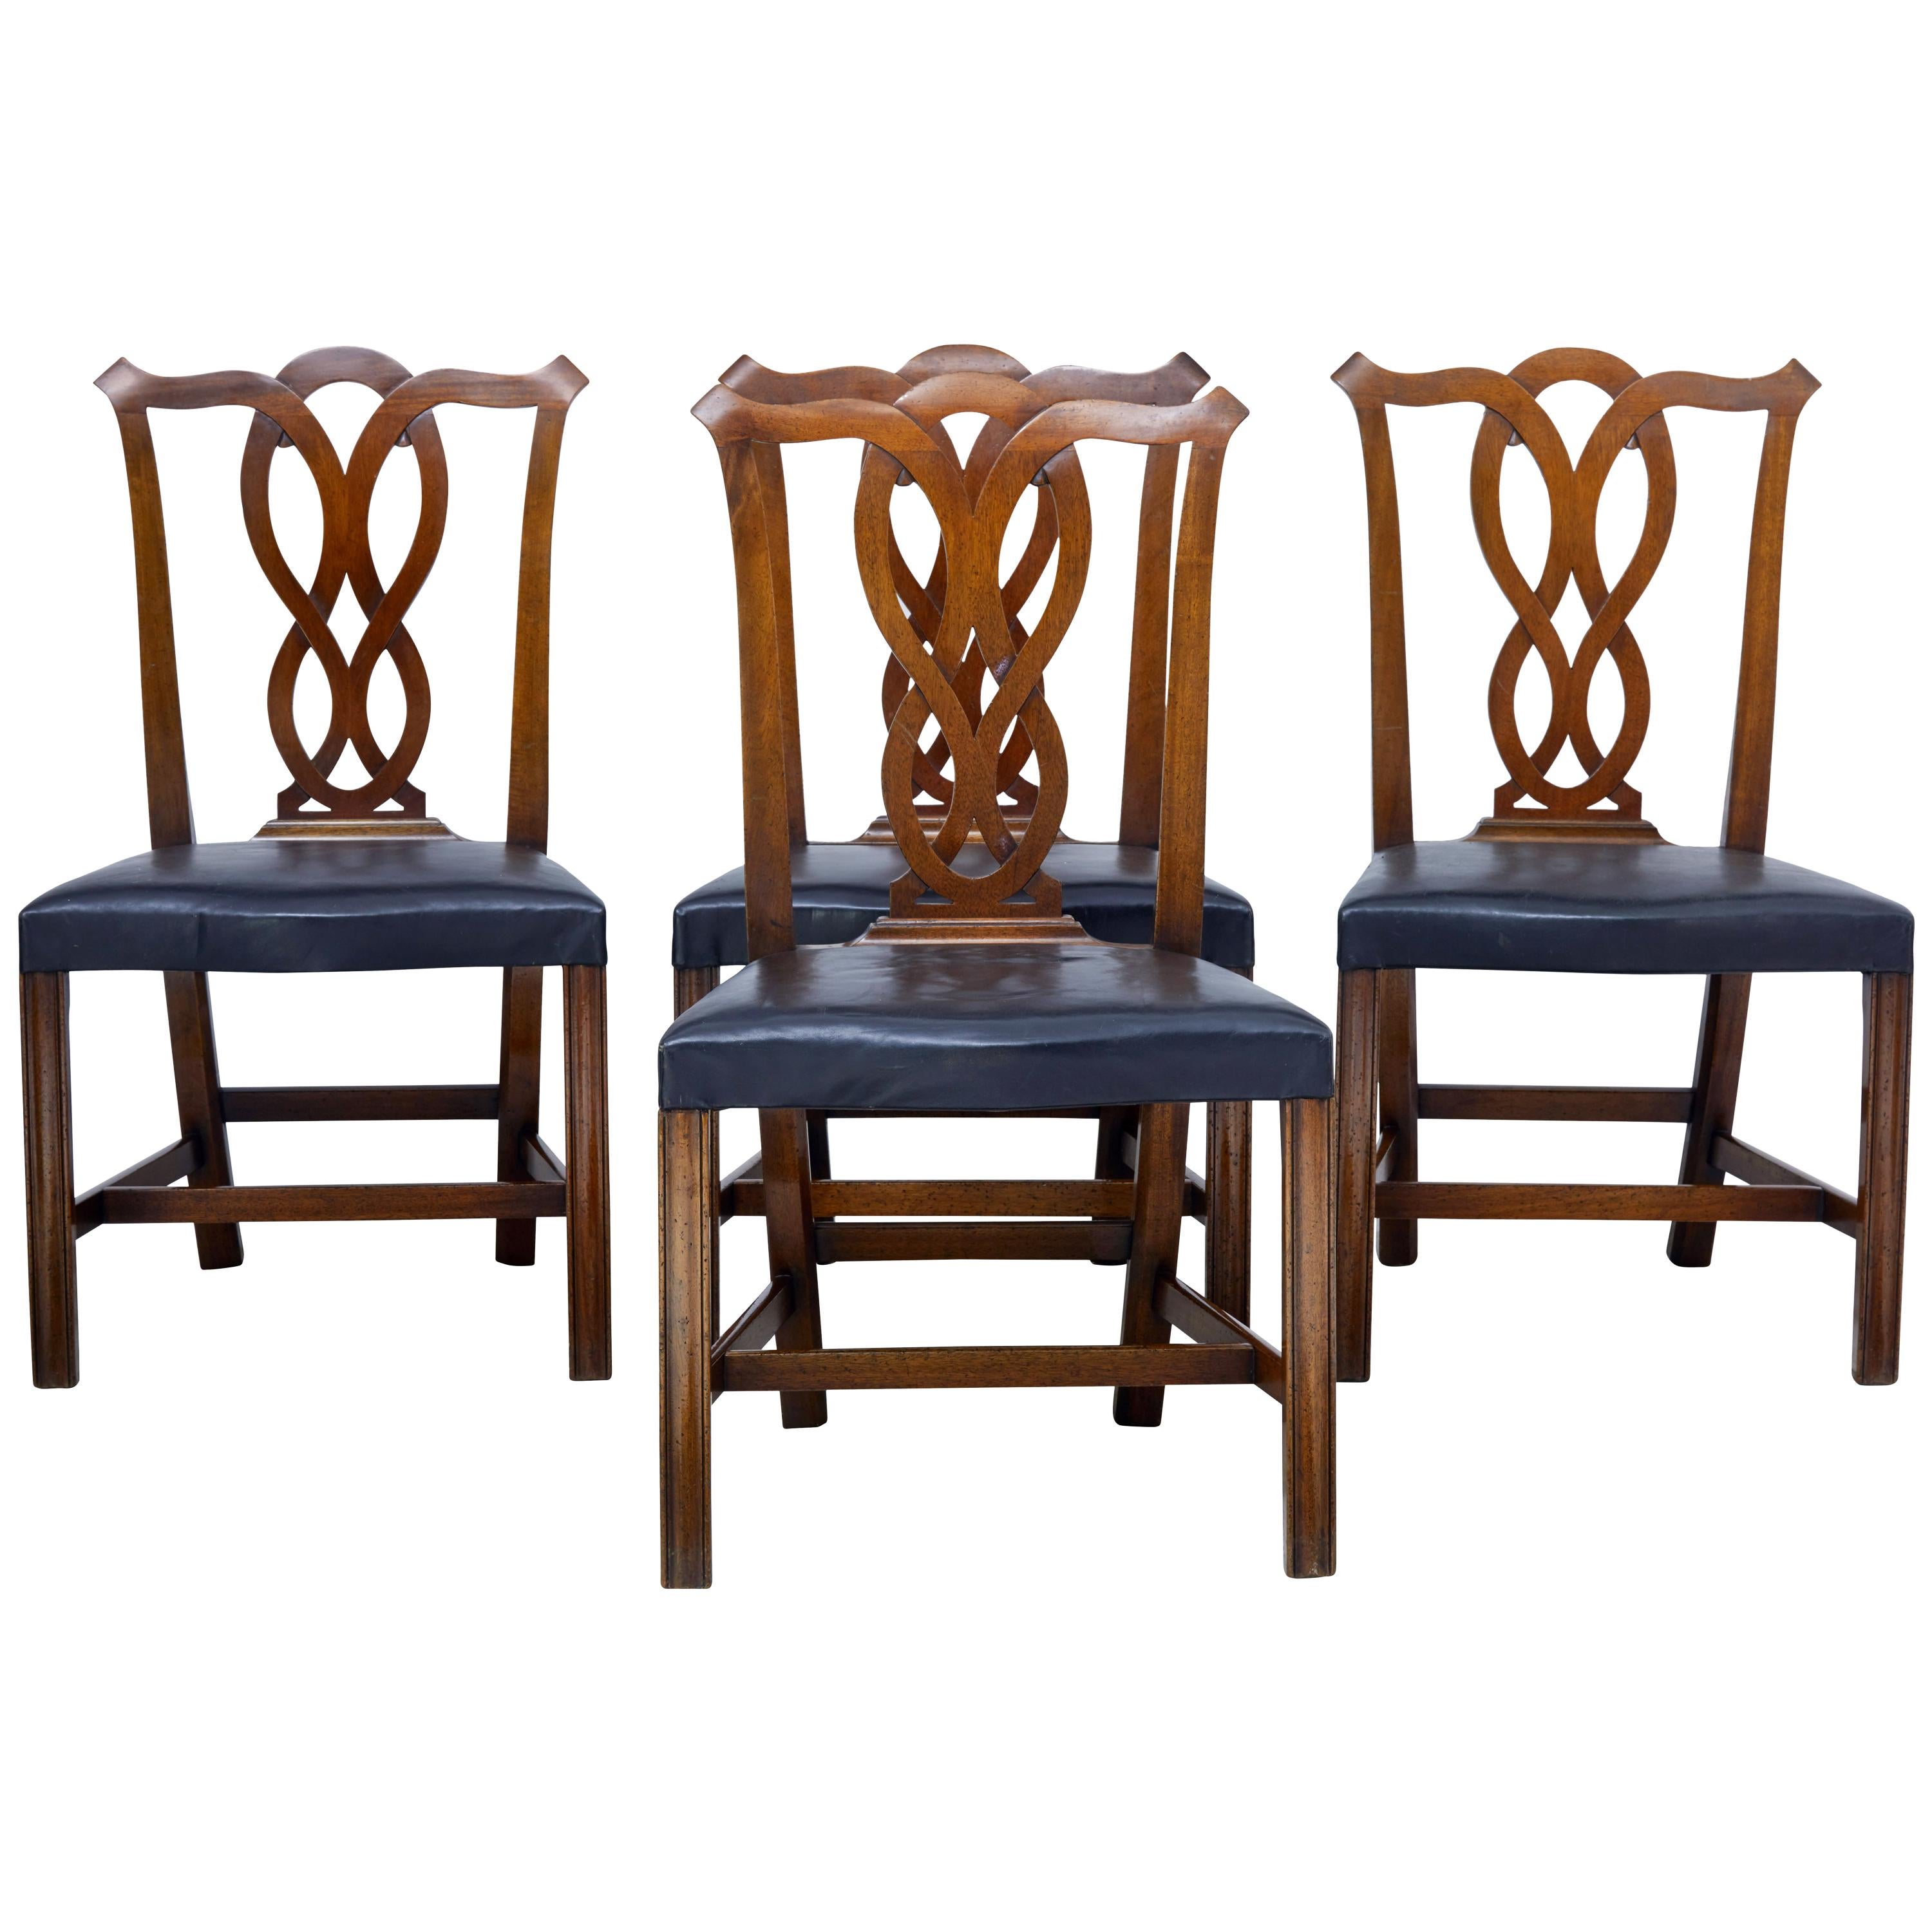 Set of Four Early 20th Century Fruitwood Dining Chairs by Nordiska Kompaniet